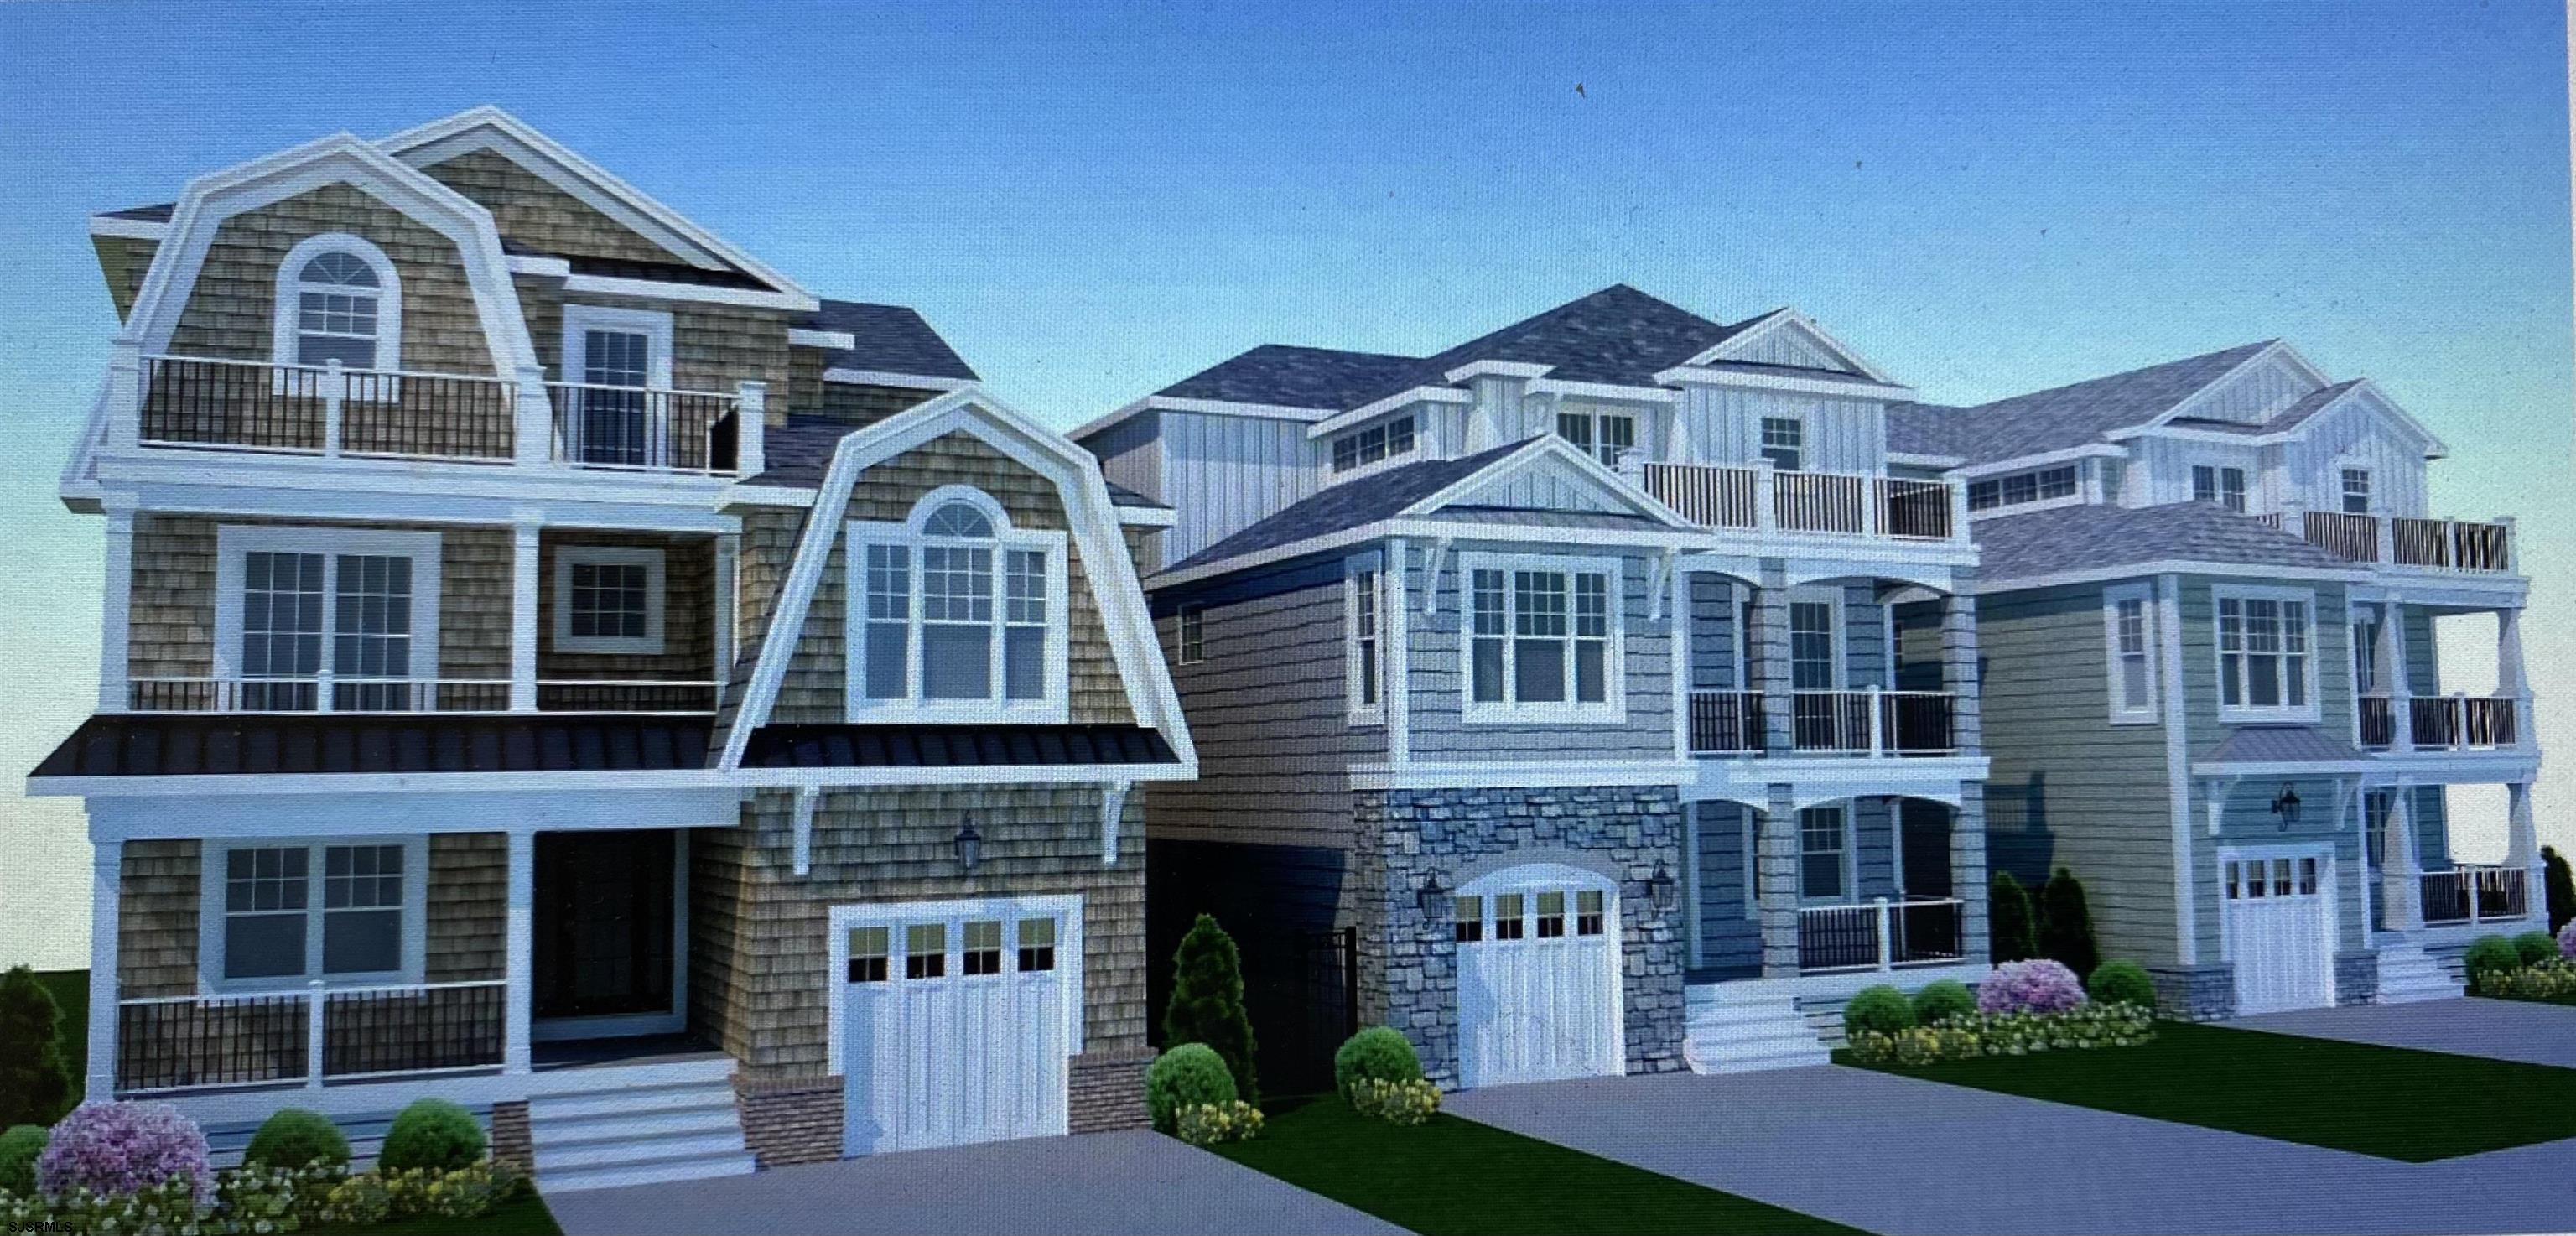 Direct Ocean Front  New Construction 4,300 sq. feet 3 story 6 Bedrooms 6.5 Baths